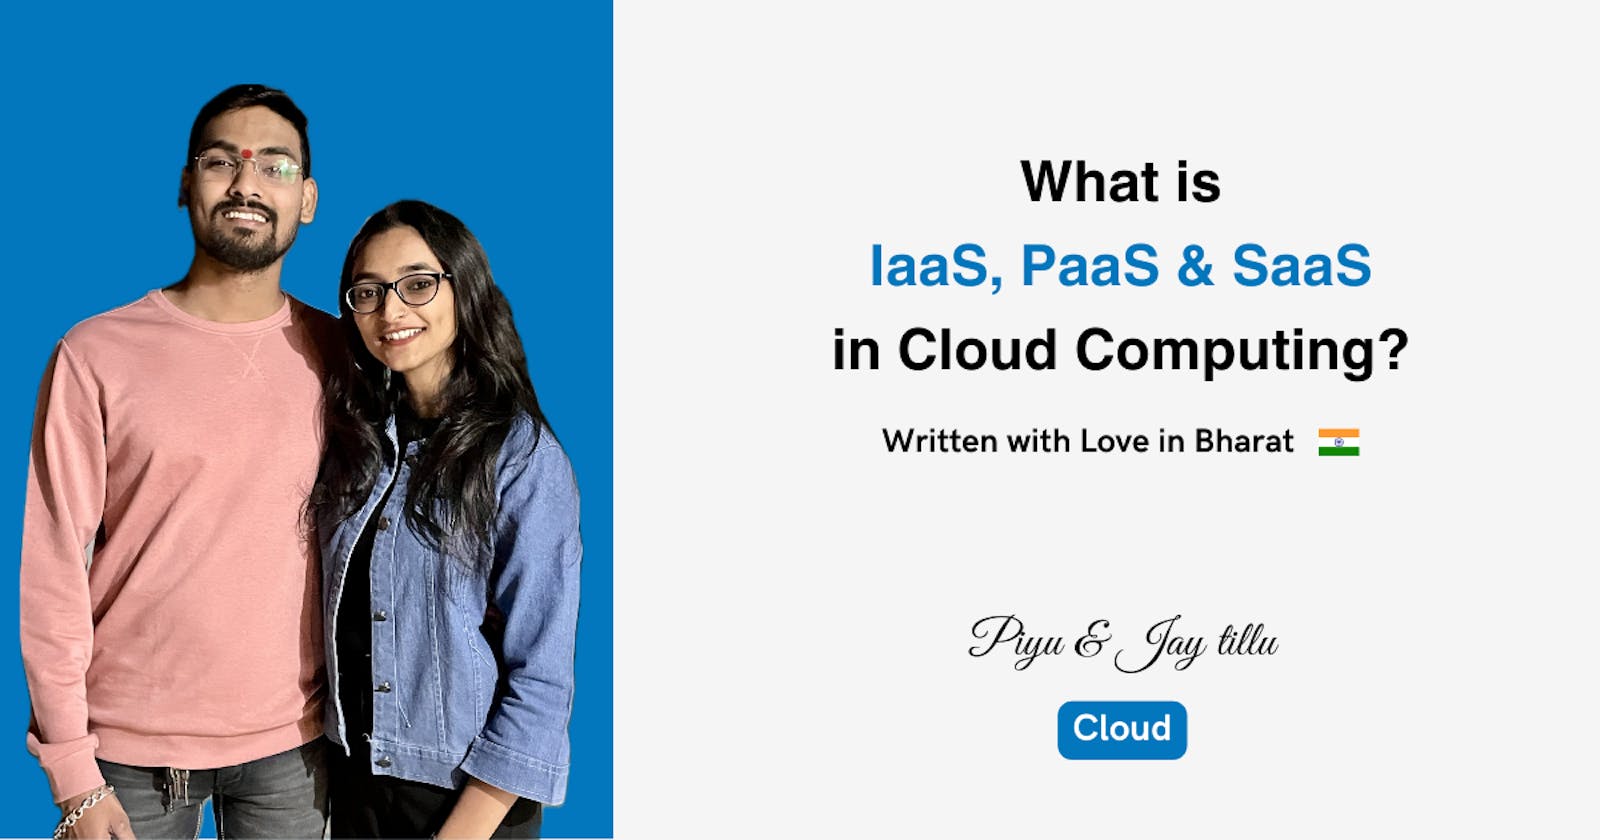 What is IaaS, PaaS, and SaaS. What is the difference between them?